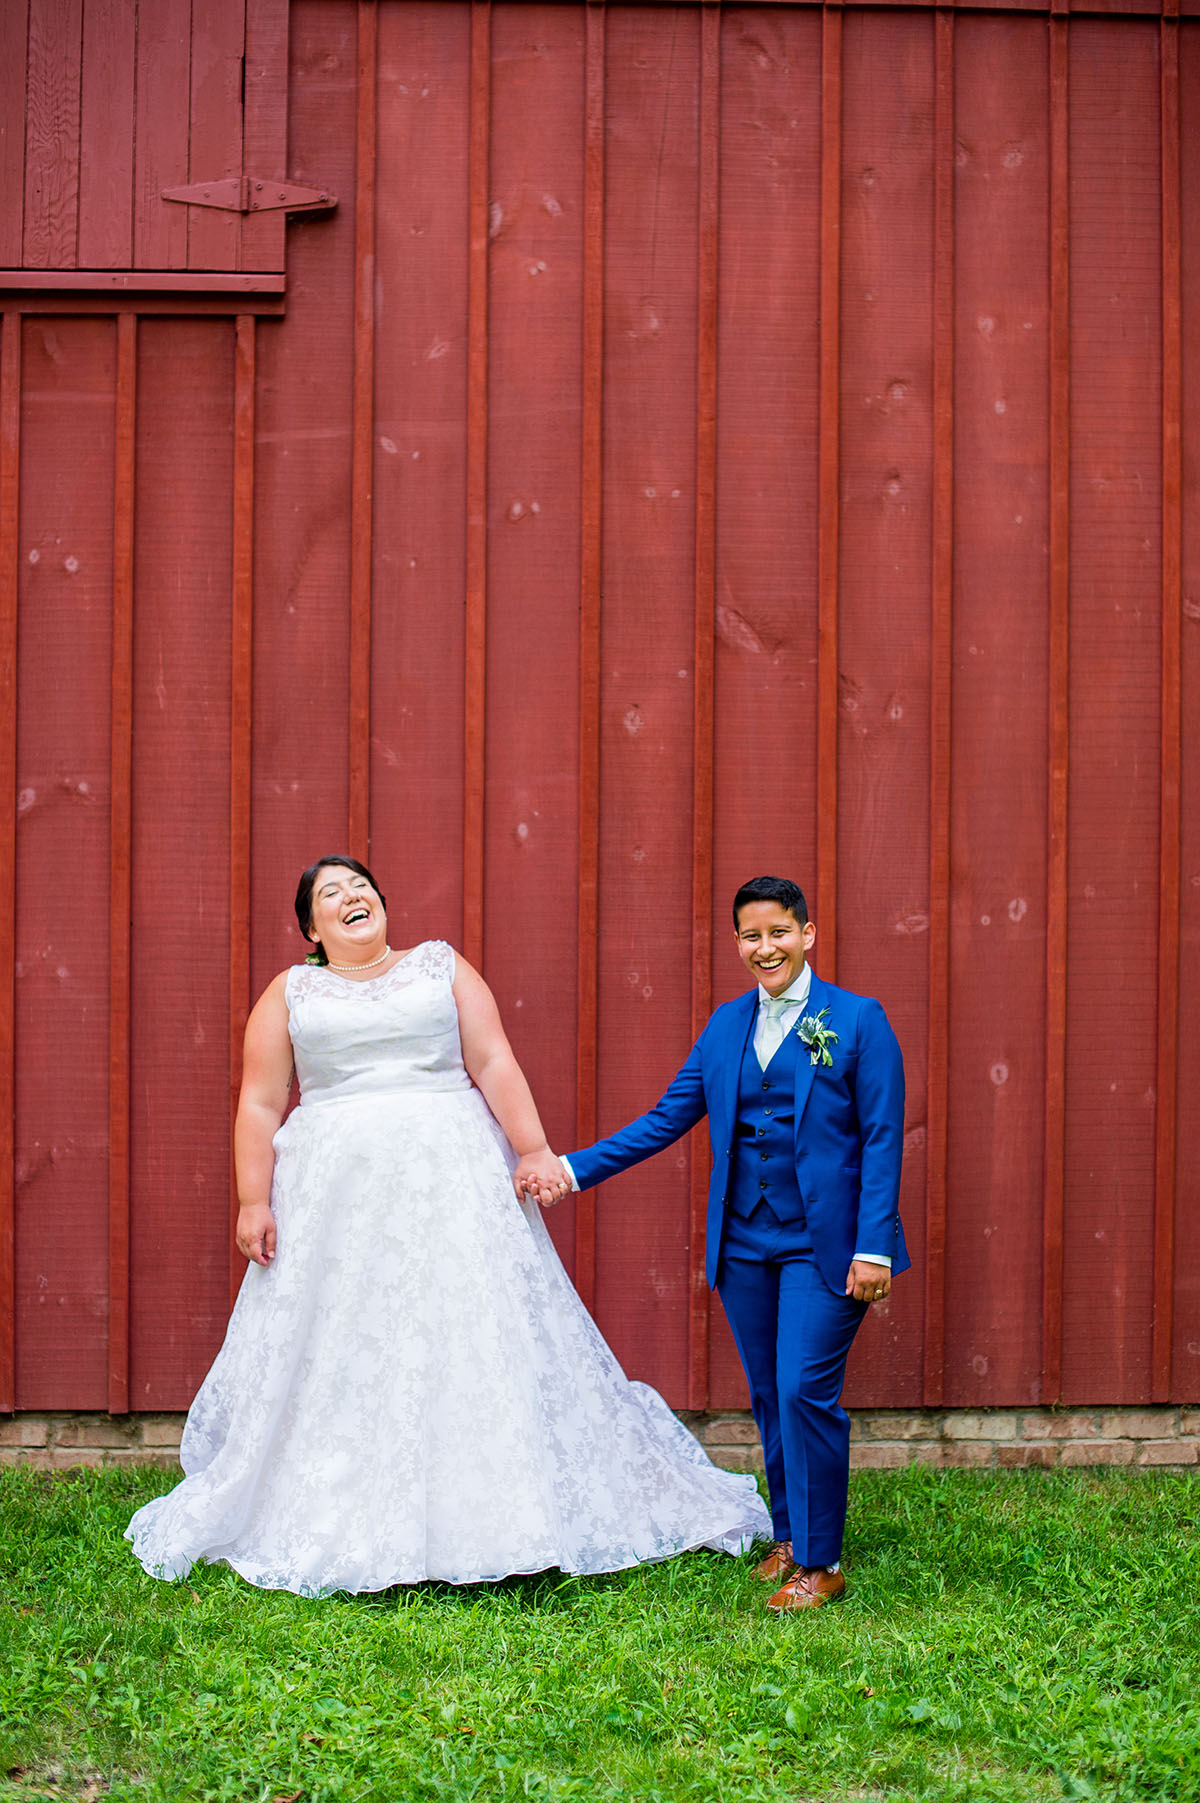 Community was at the heart of this floral summer wedding LGBTQ+ weddings two brides queer lesbian wedding Long Island New York Bindle and Keep